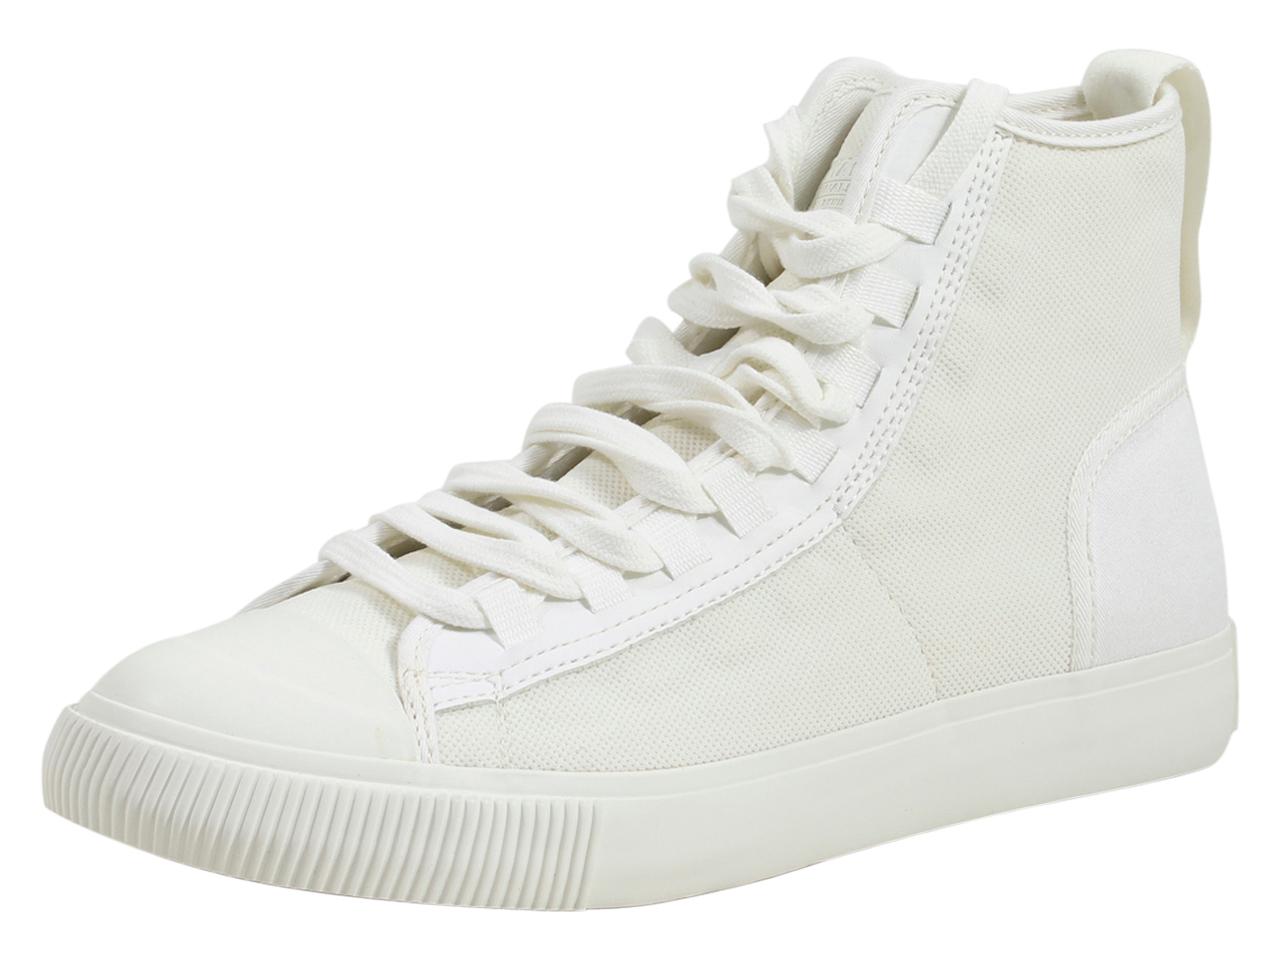 g star raw high top sneakers